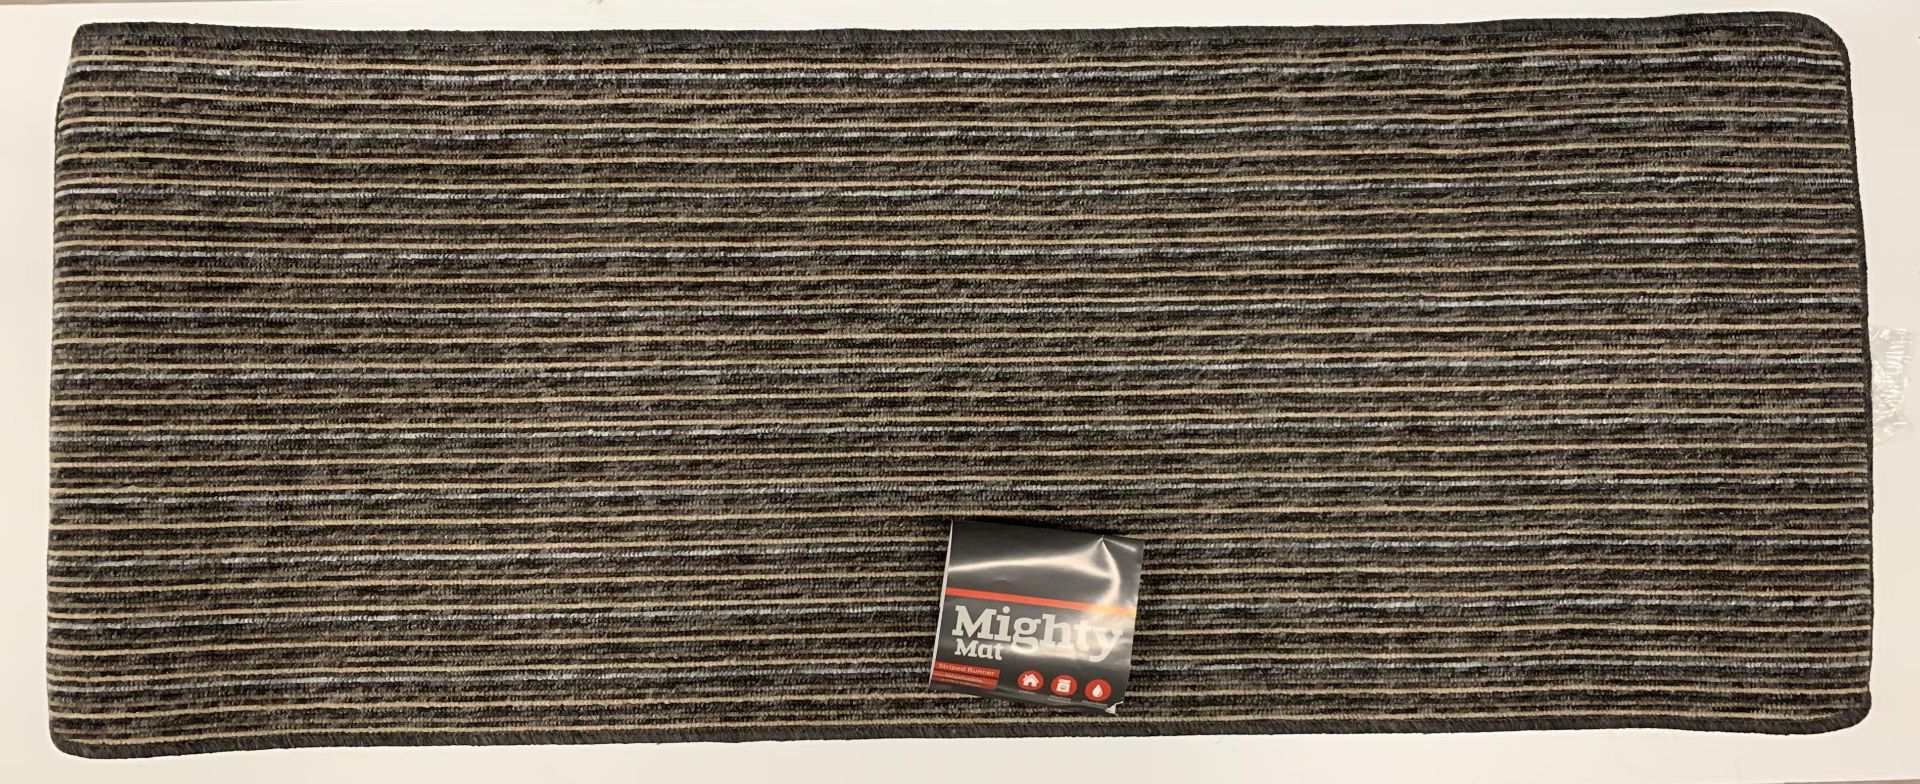 24 x Mighty Mat striped washable runner - 57cm x 150cm (4 outer packs) - Image 2 of 2